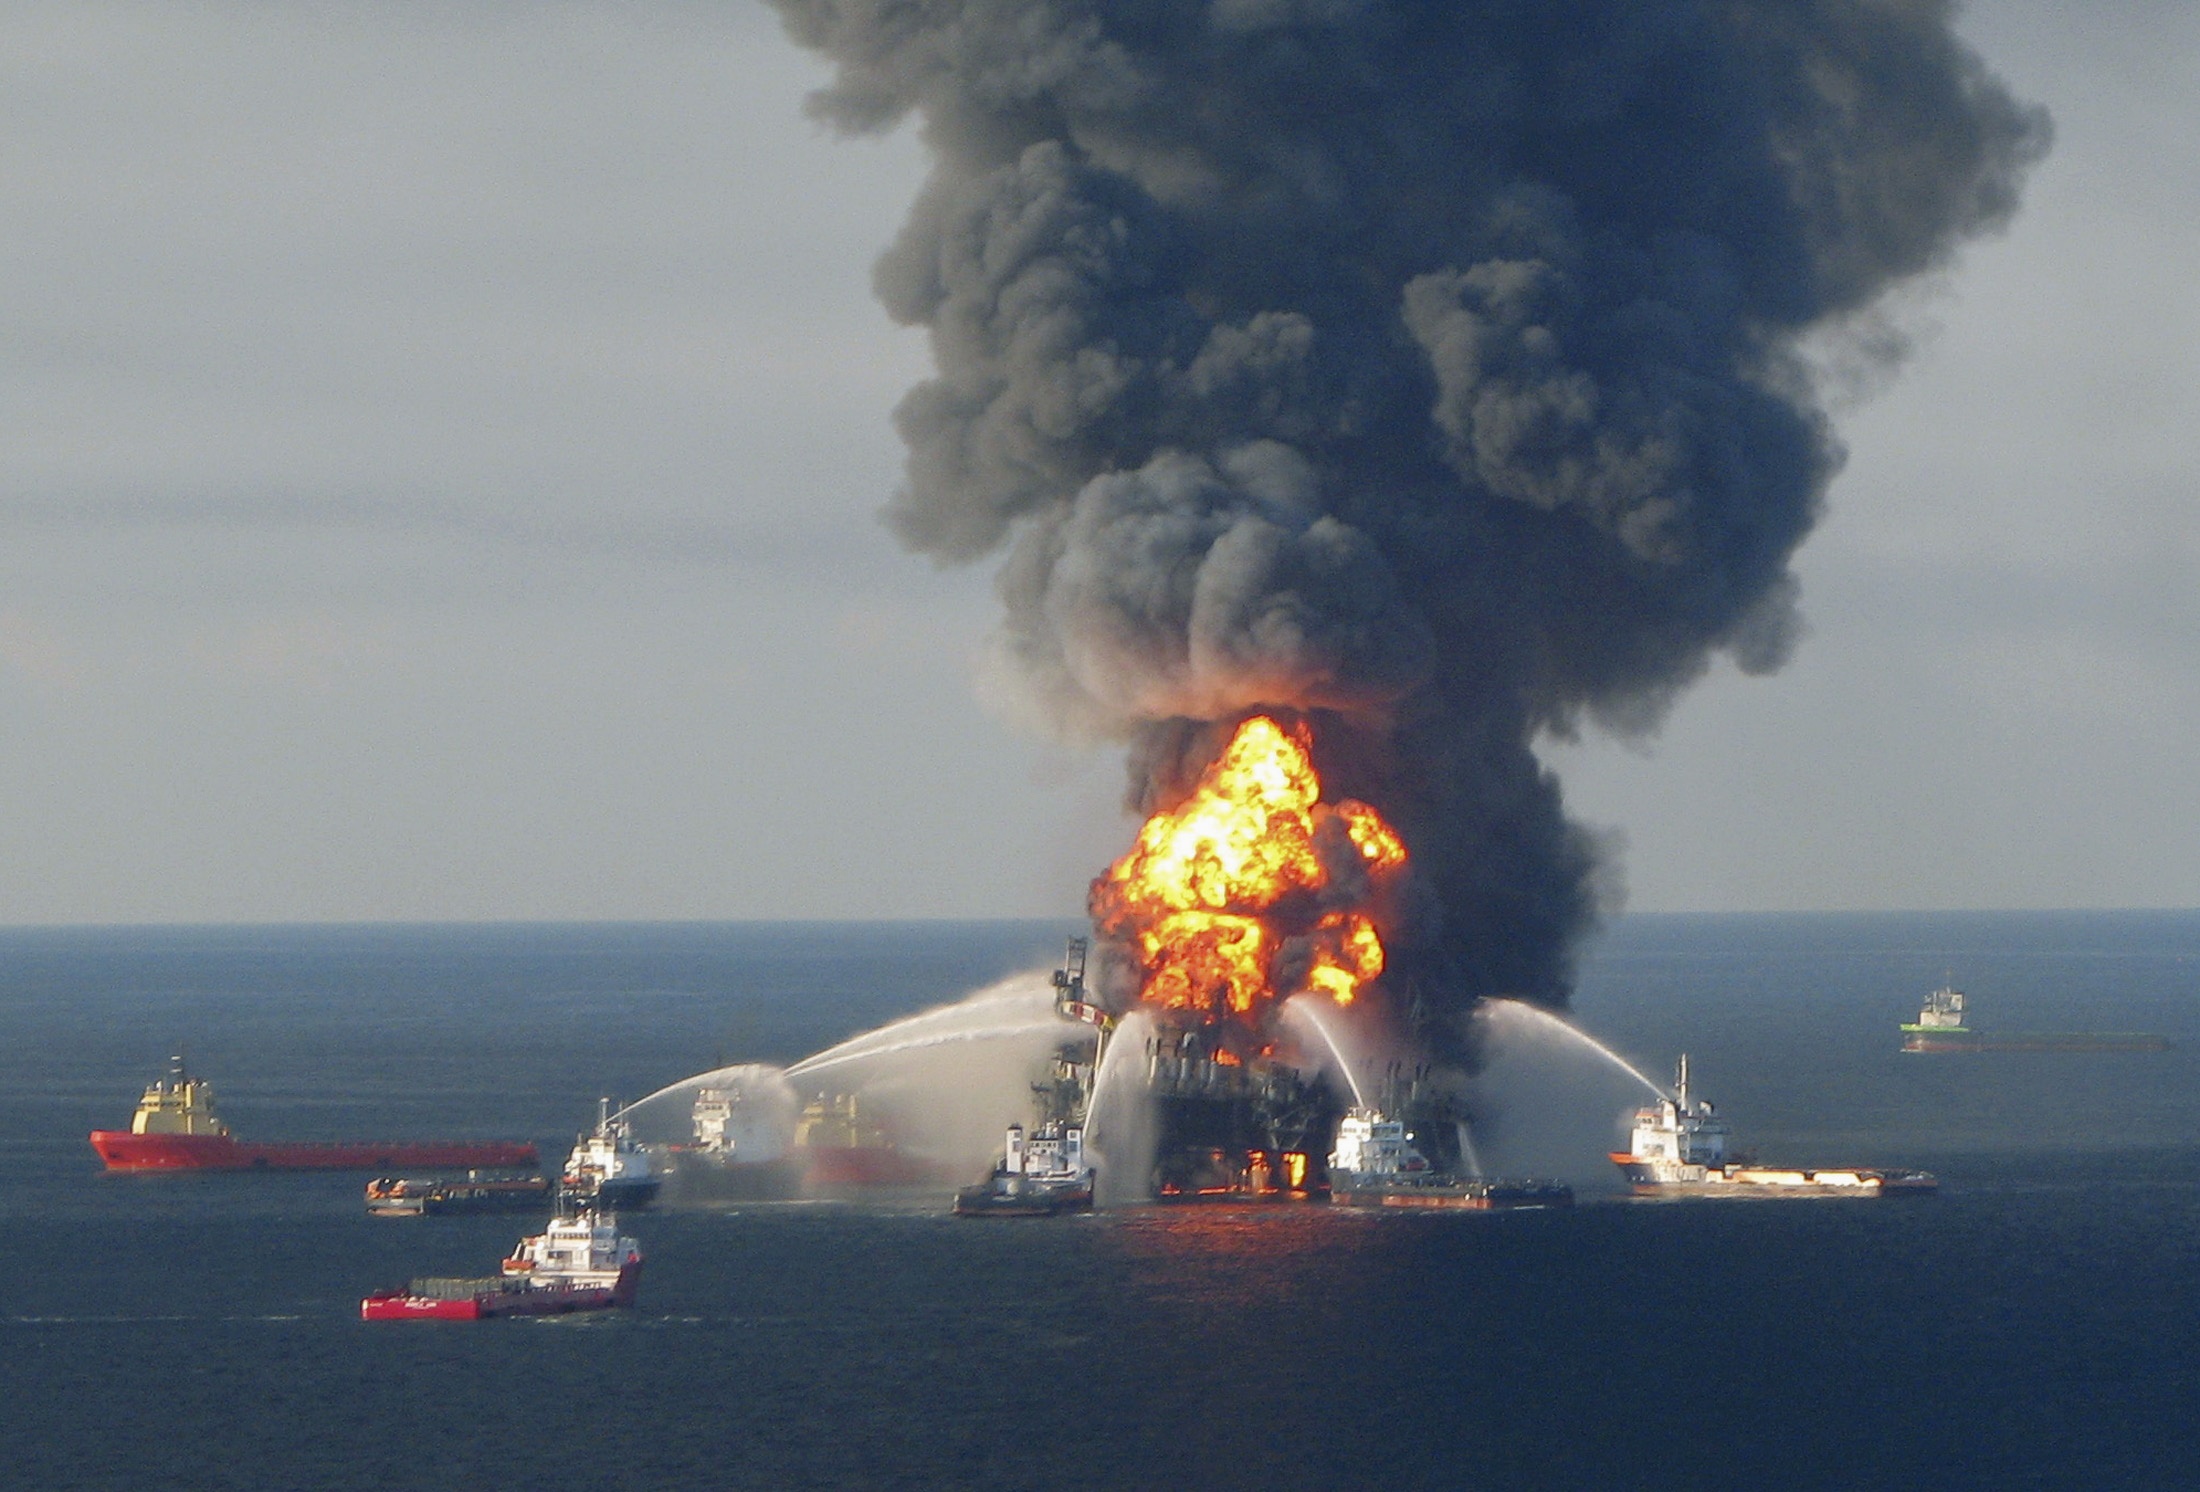 Eleven workers were killed in April 2010 when a blowout of BP’s Macondo well triggered an explosion on the Deepwater Horizon drilling rig. Photo: Reuters